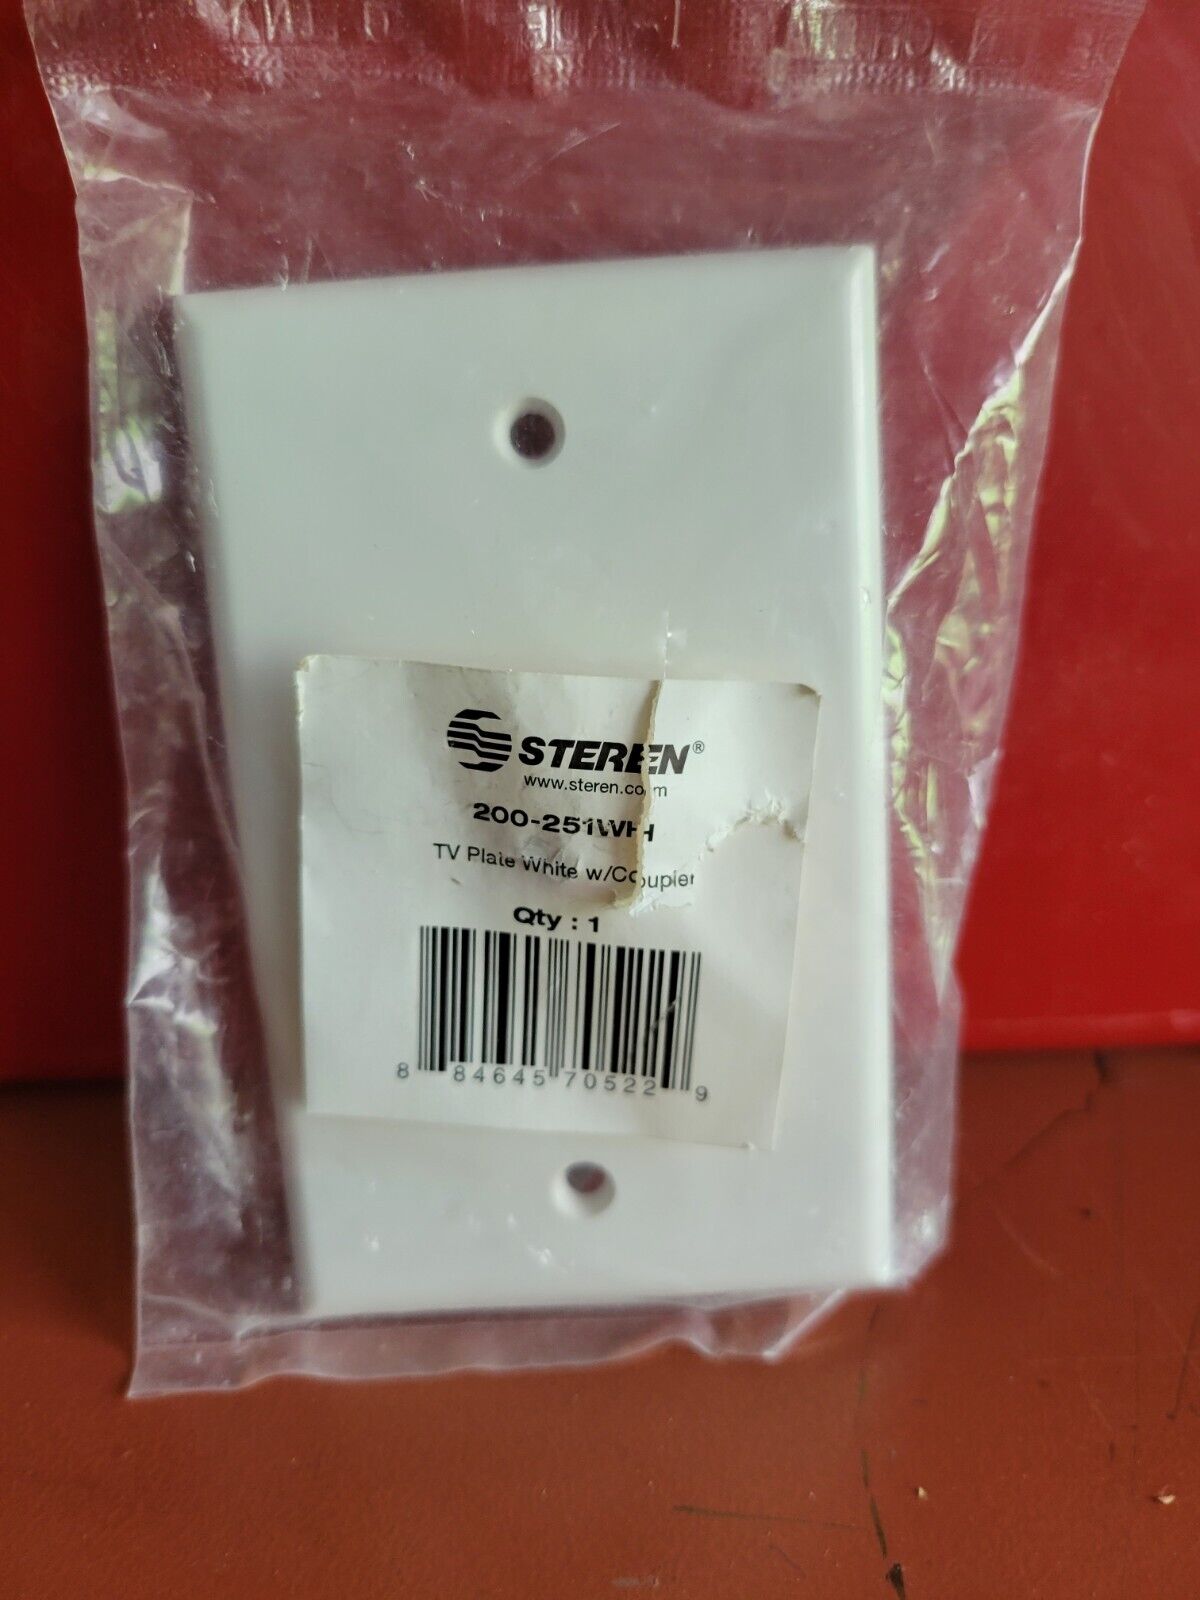 *NEW* STEREN TV PLATE W/ COUPLER WHITE 200-251WH COAX HOOKUP RV CAMPER MOTORHOME